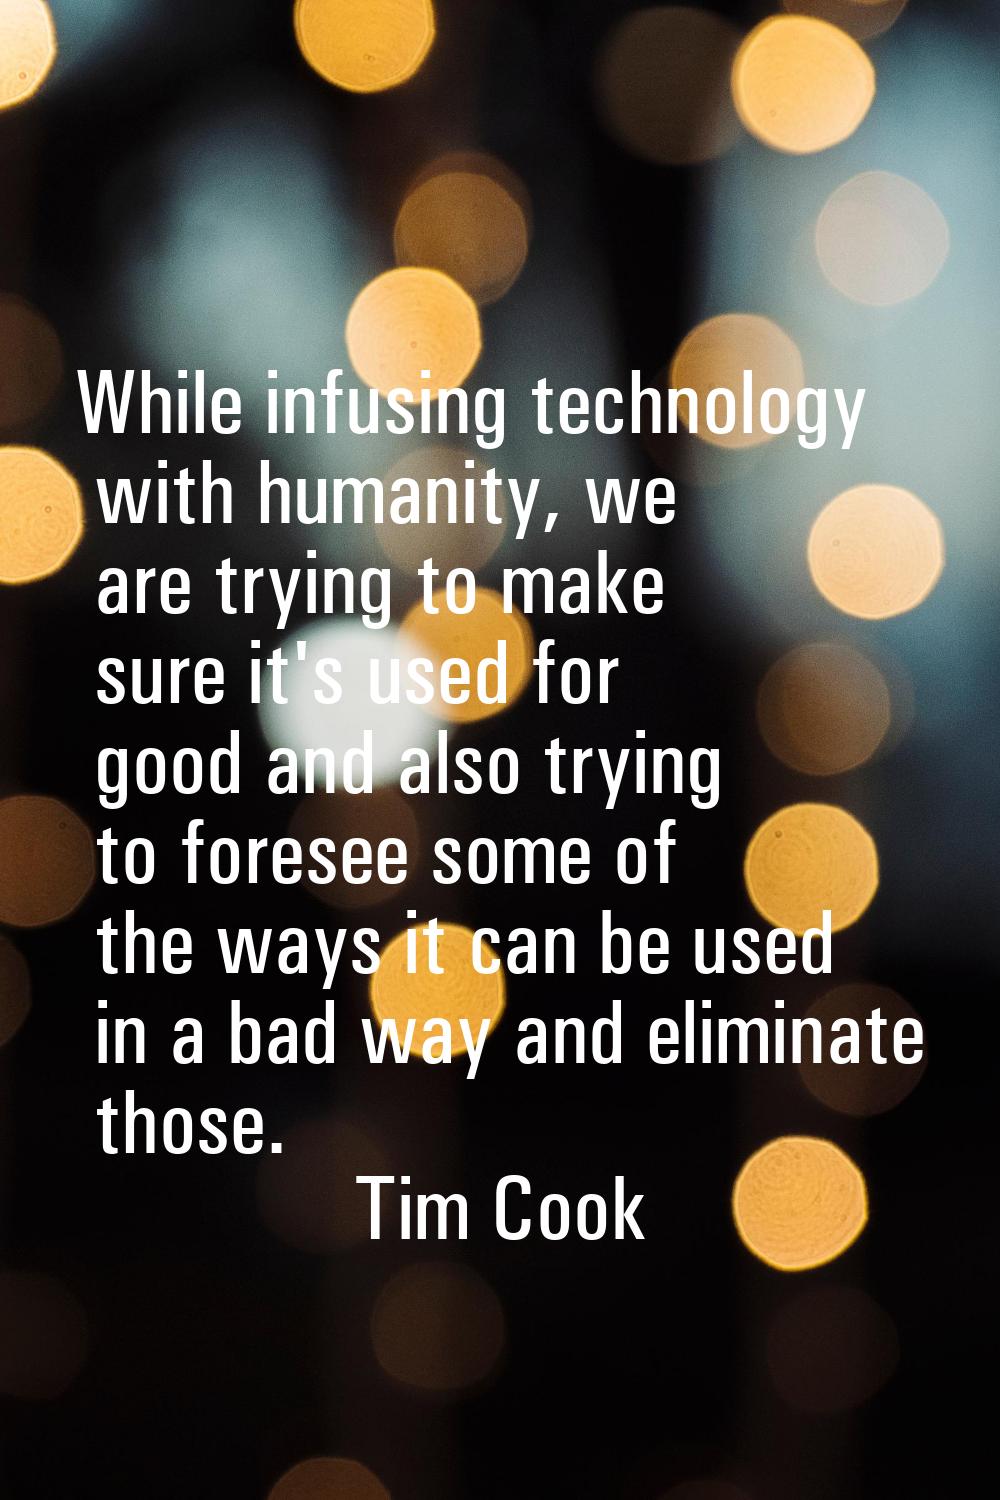 While infusing technology with humanity, we are trying to make sure it's used for good and also try